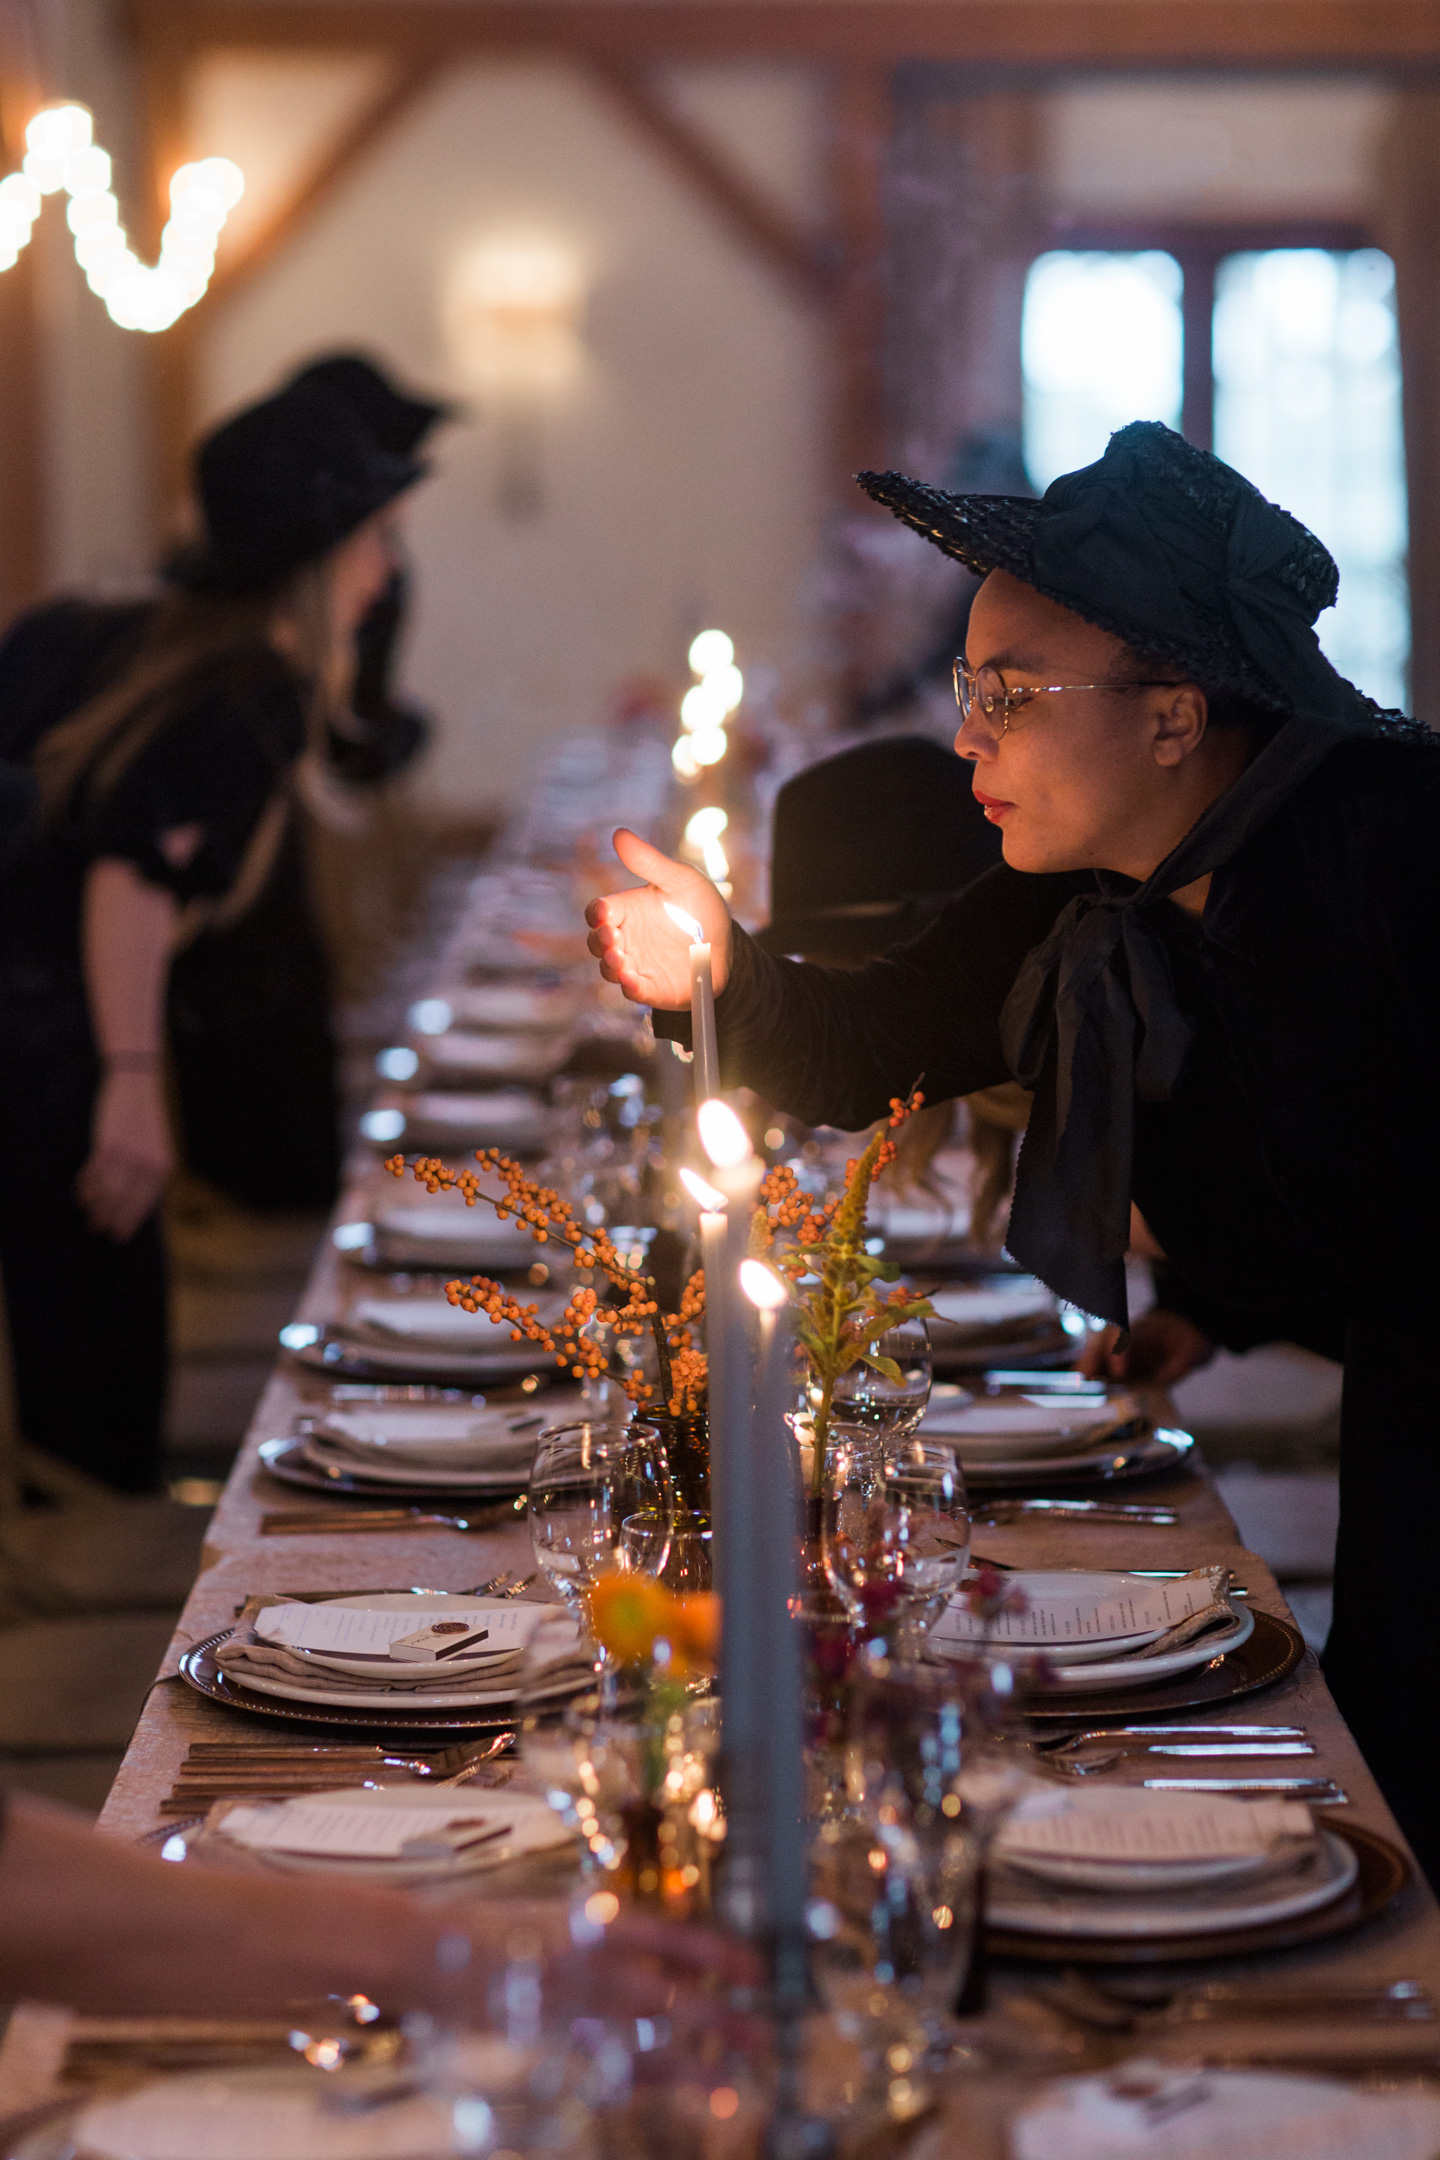 An evening at Blue Bell Farms dinner as they hosted their fire themed dinner captured by Love Tree Studios.